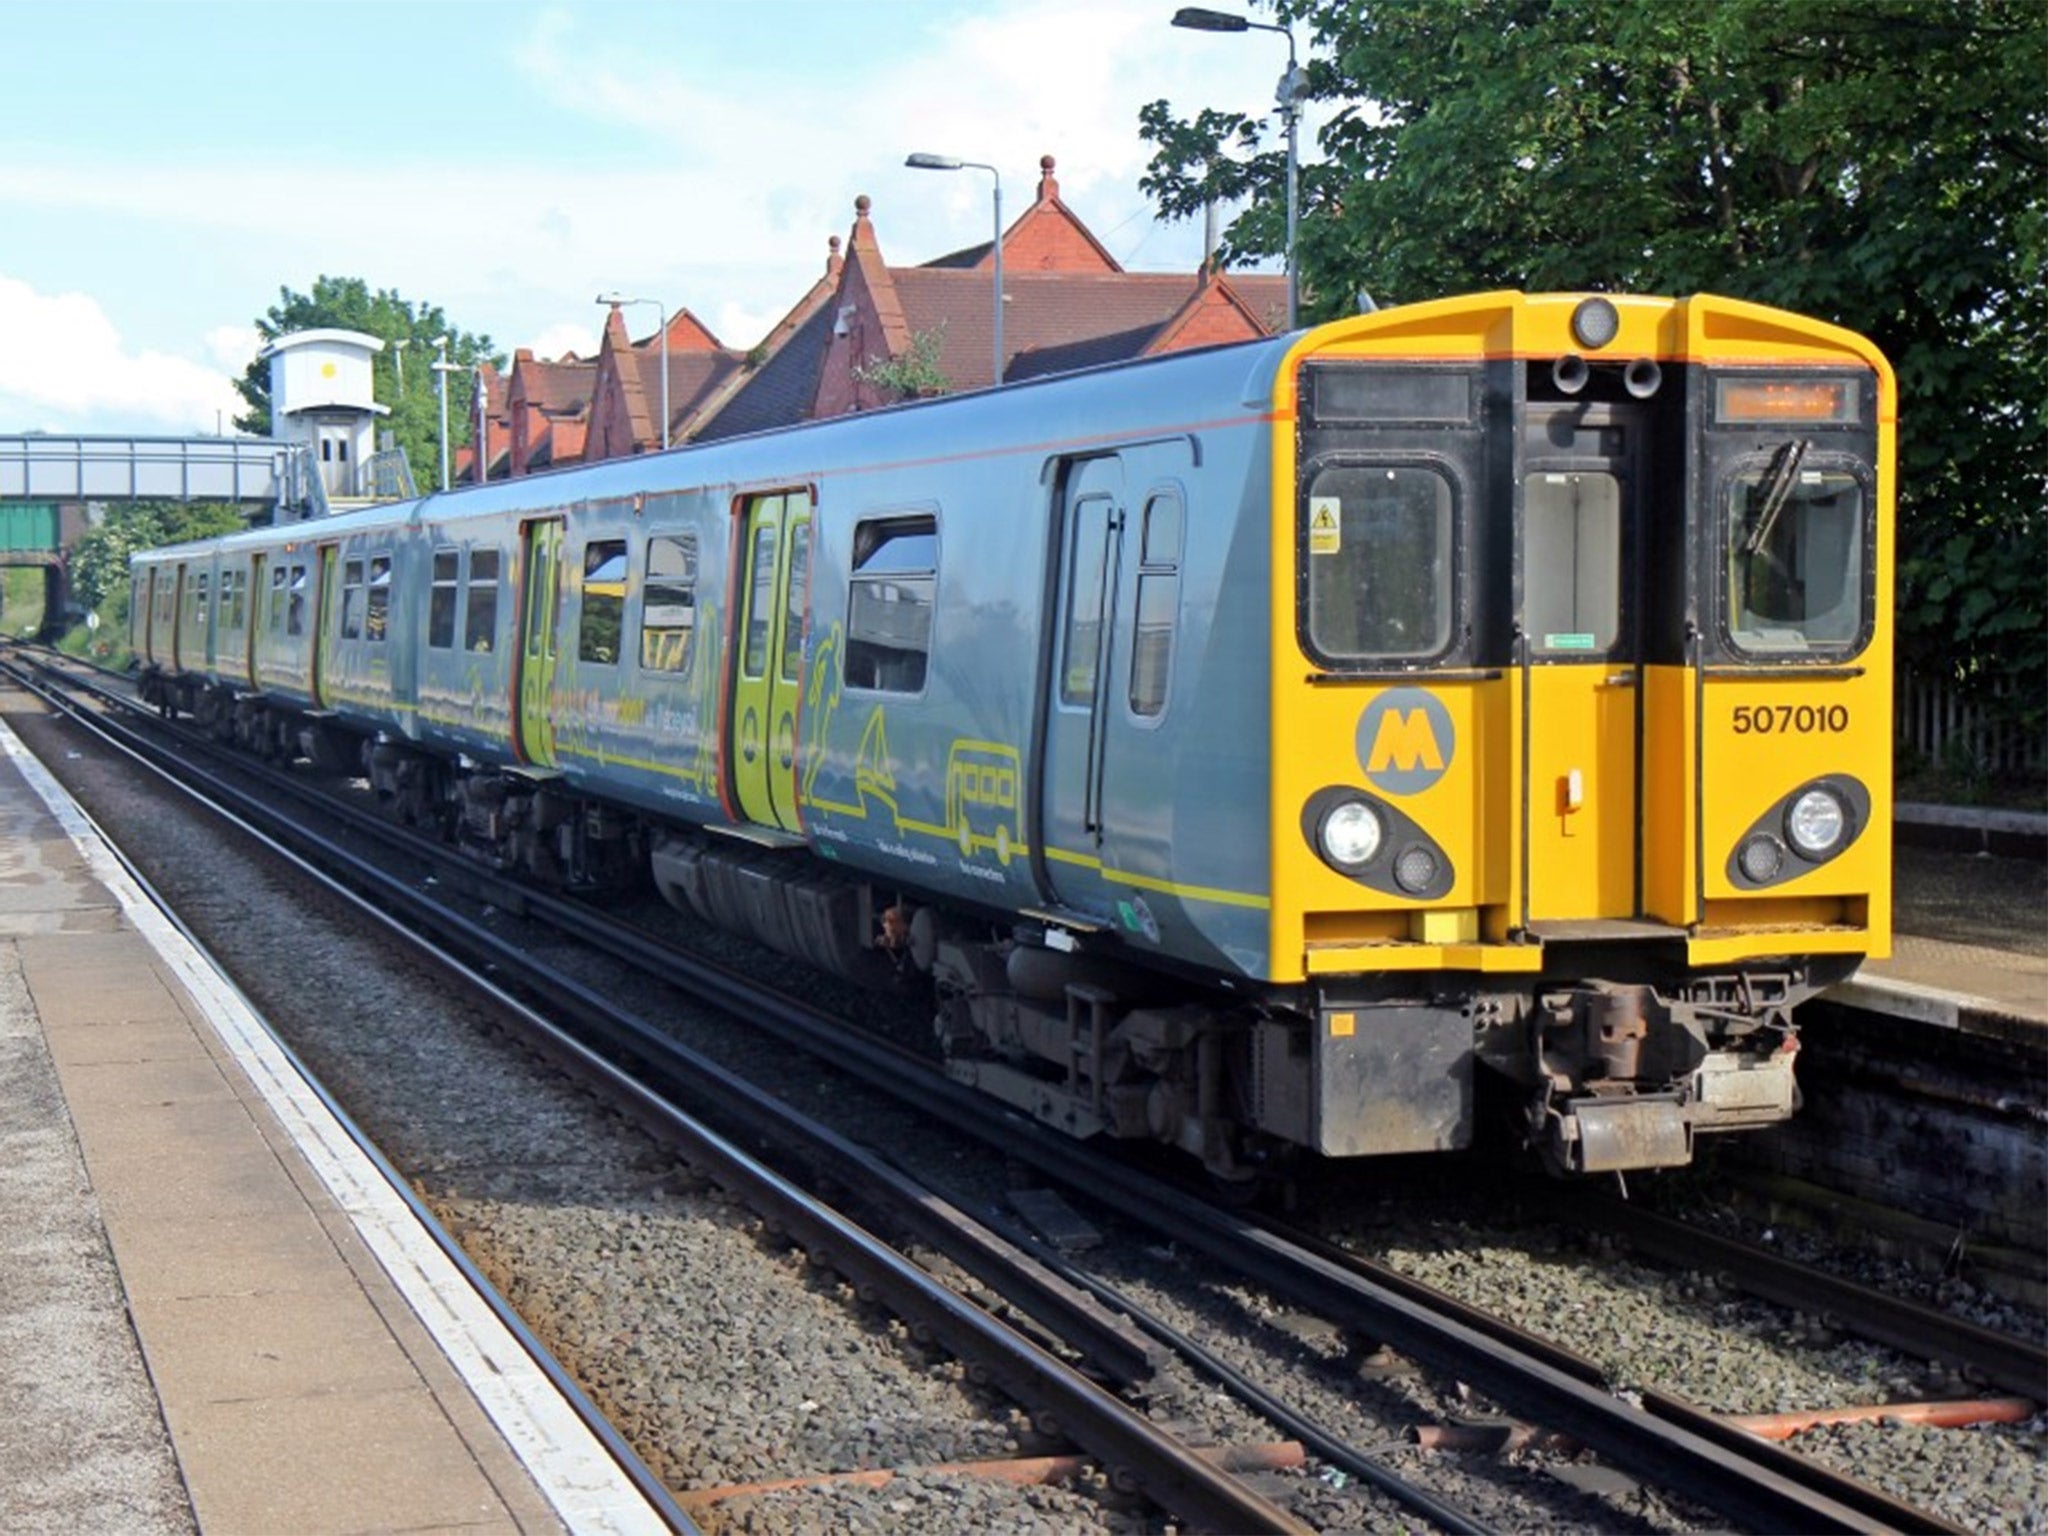 Merseyrail trains have an average age of 36 years